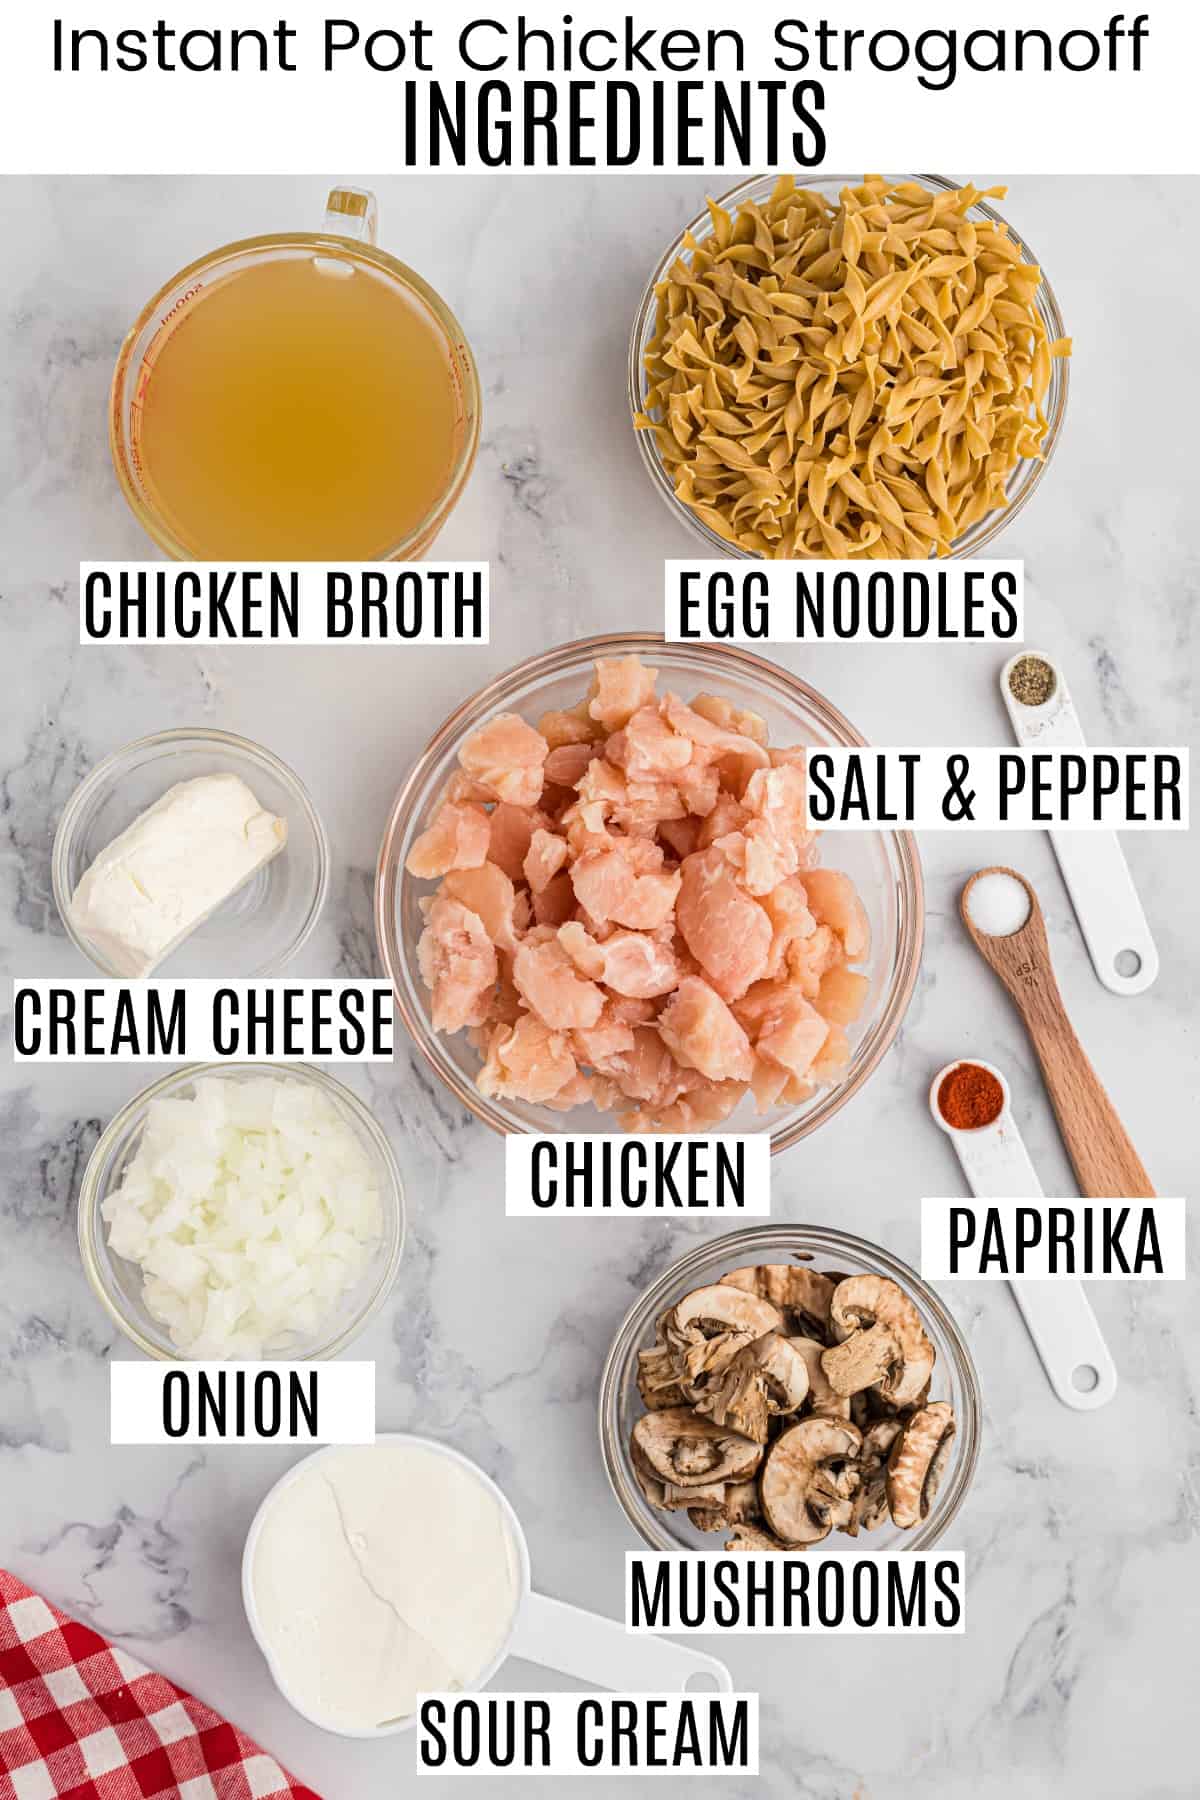 Ingredients for chicken stroganoff in a small bowls on counter.